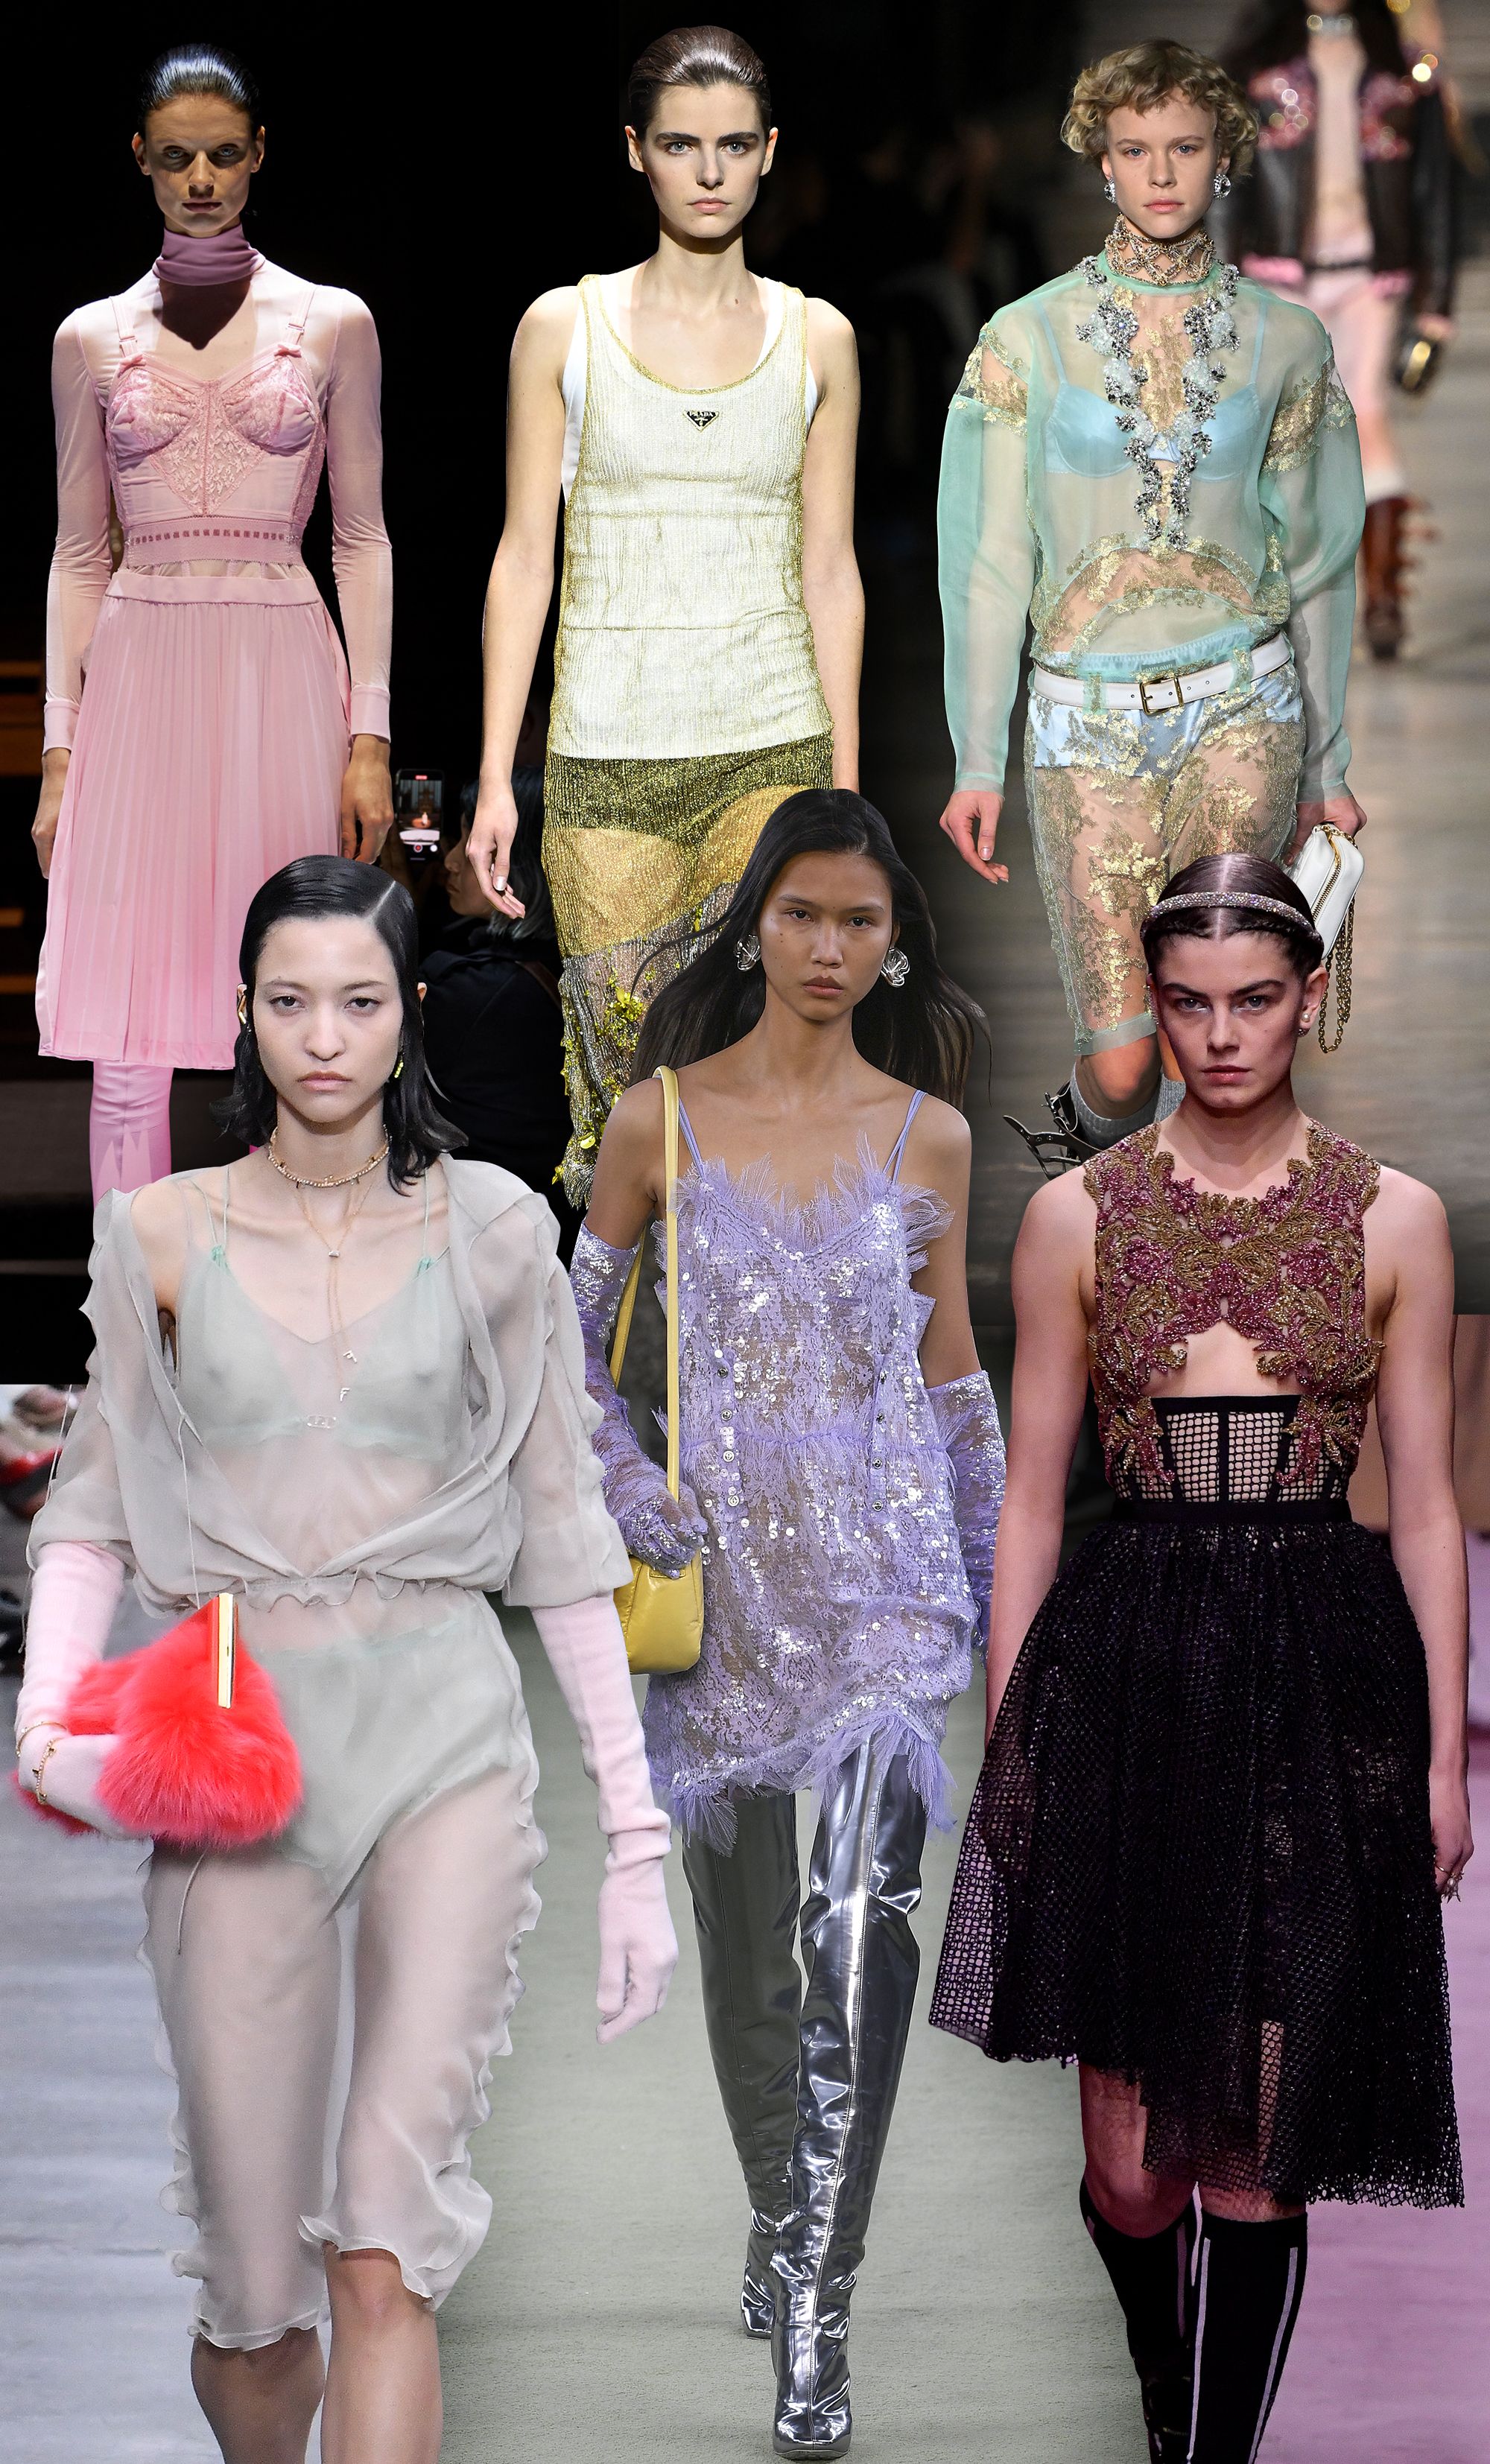 Autumn Trends 2022 - All The Key Looks To Know